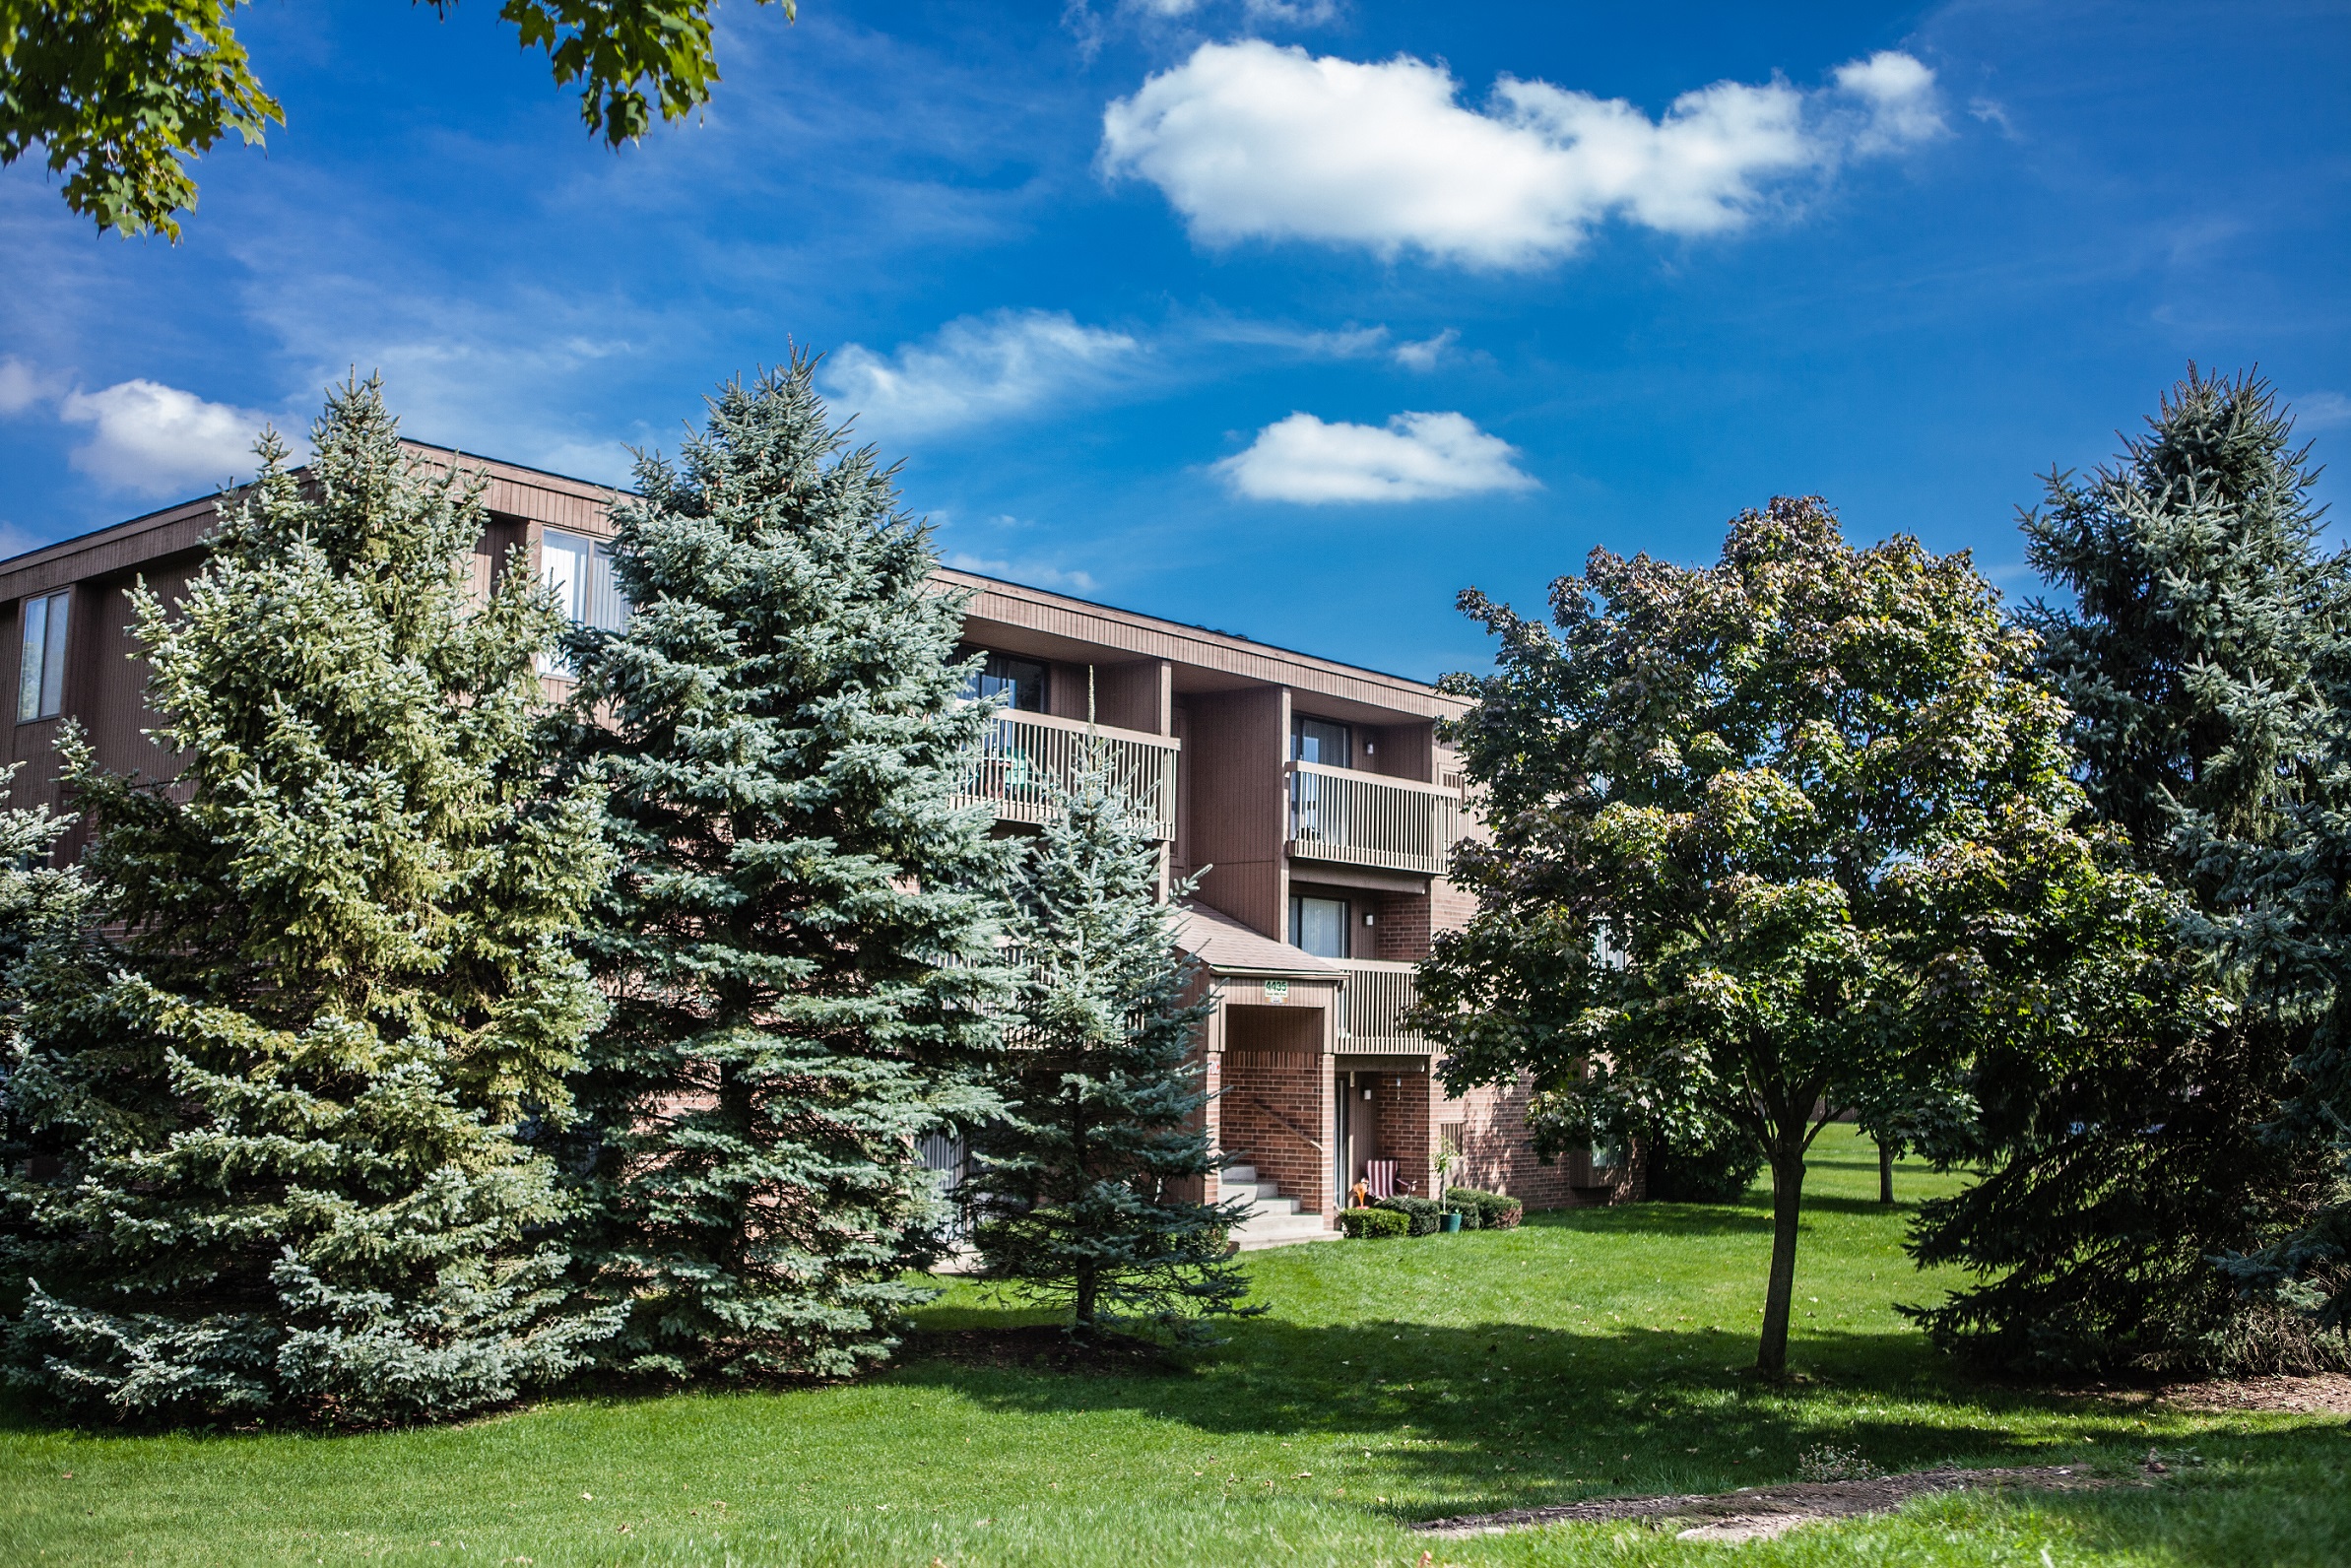 Exterior building with trees in courtyard at Dover Hills Apartments in Kalamazoo, MI